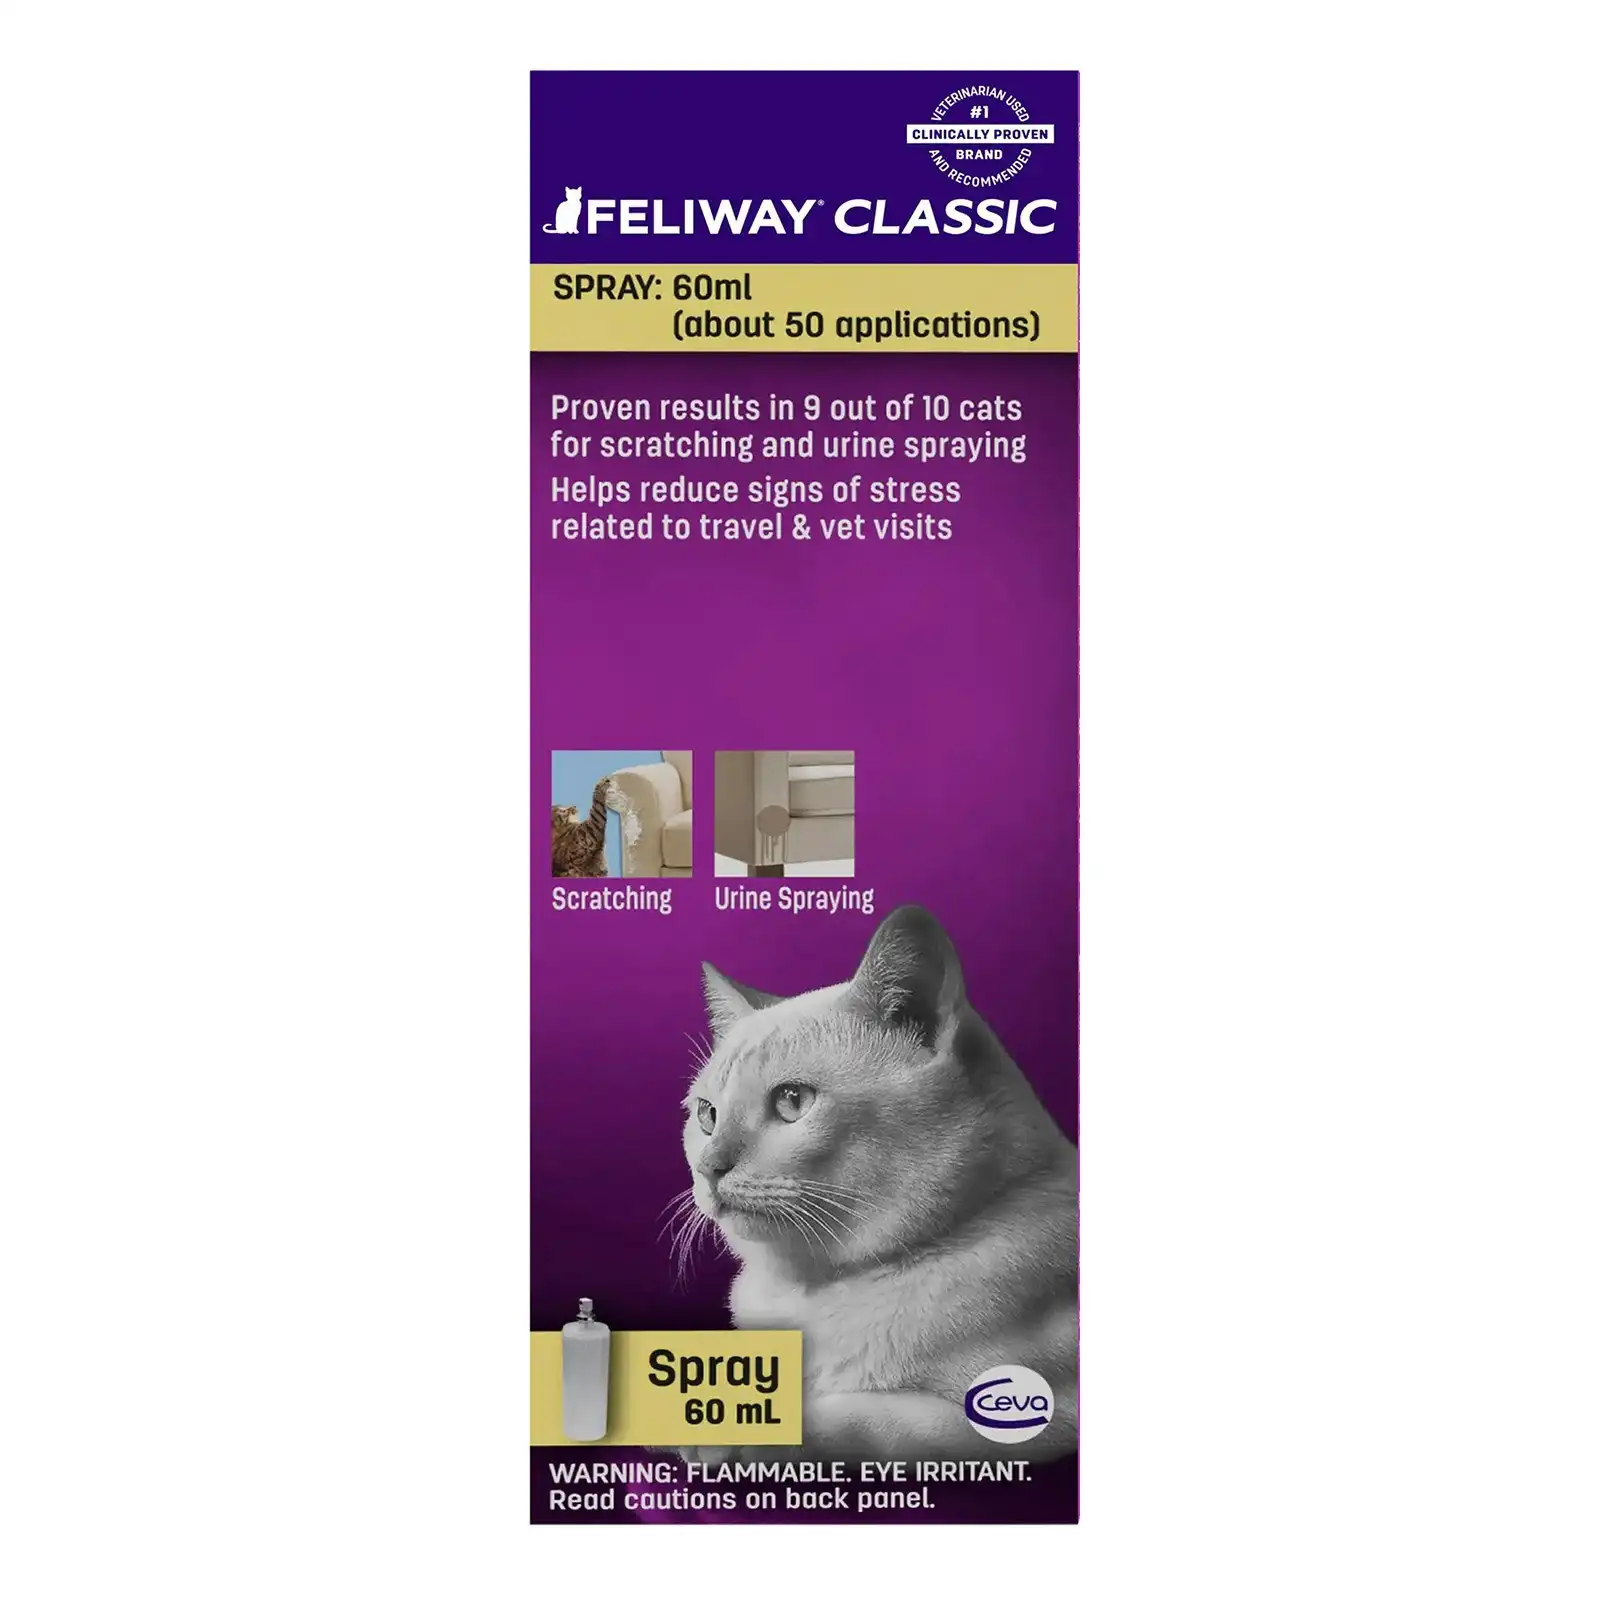 FELIWAY Spray for Kittens and Cats 60 mL